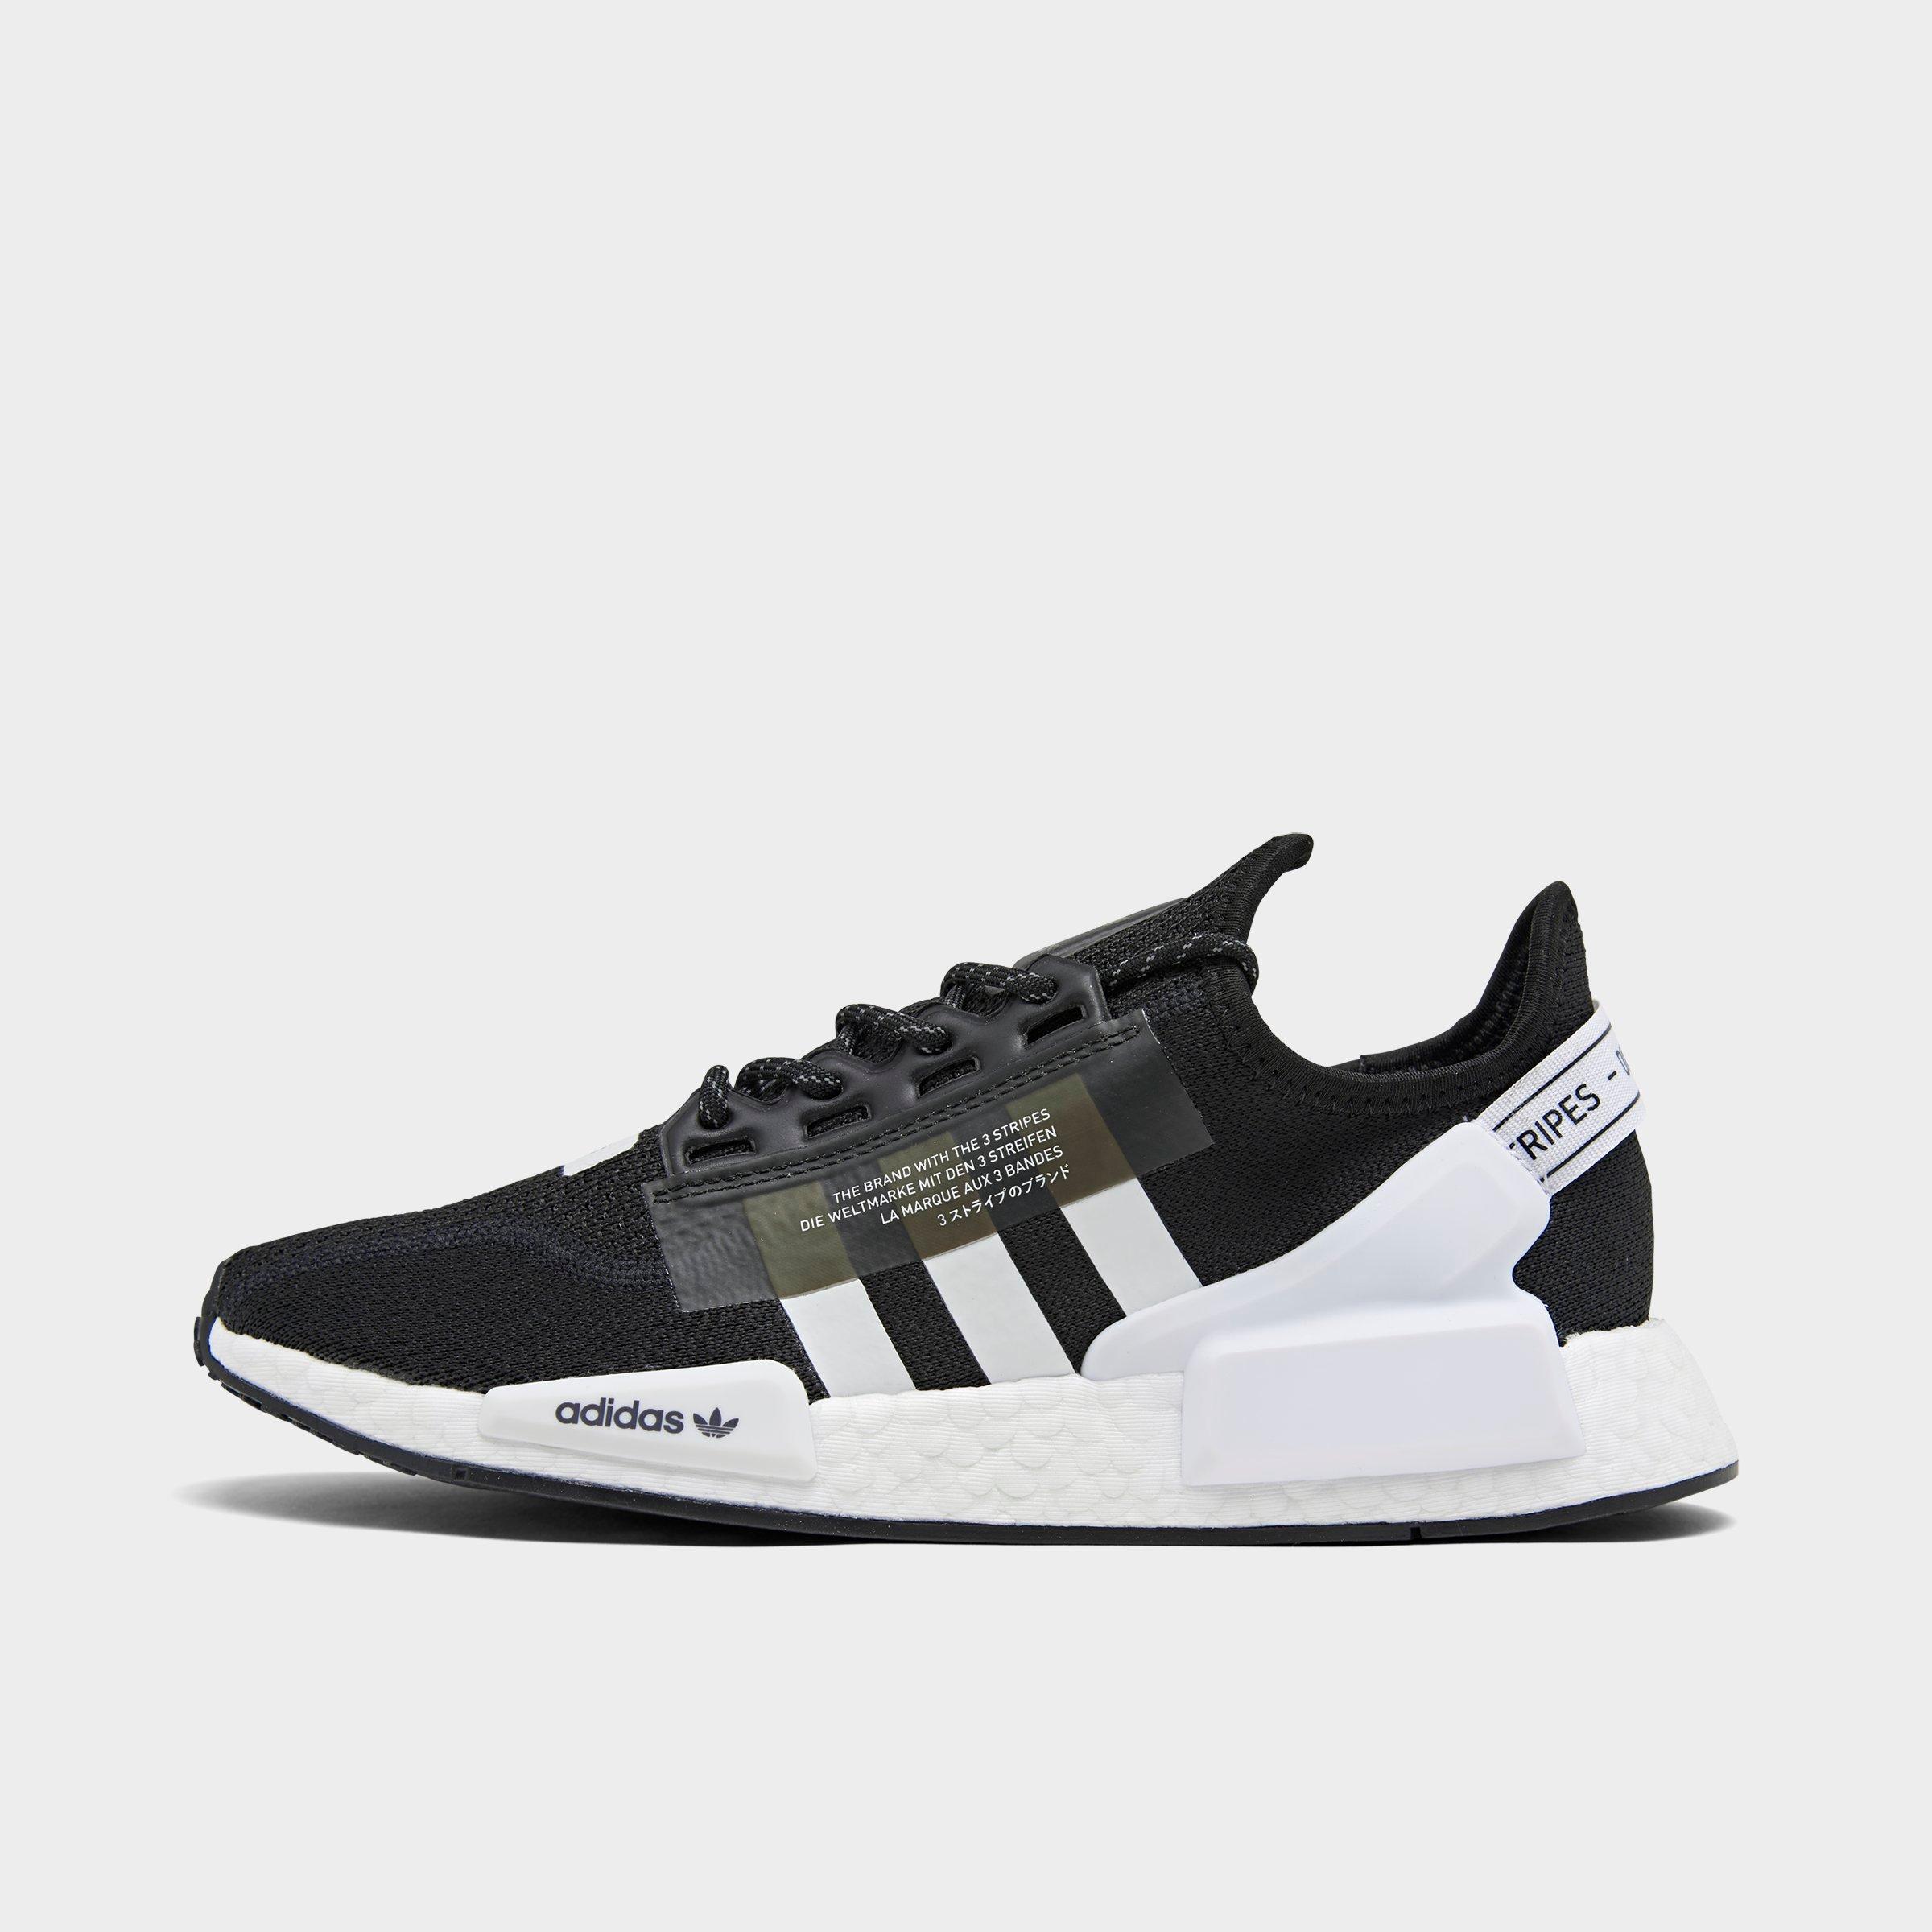 Adidas Nmd R1 Black Solid Gray Black His Trainers Office